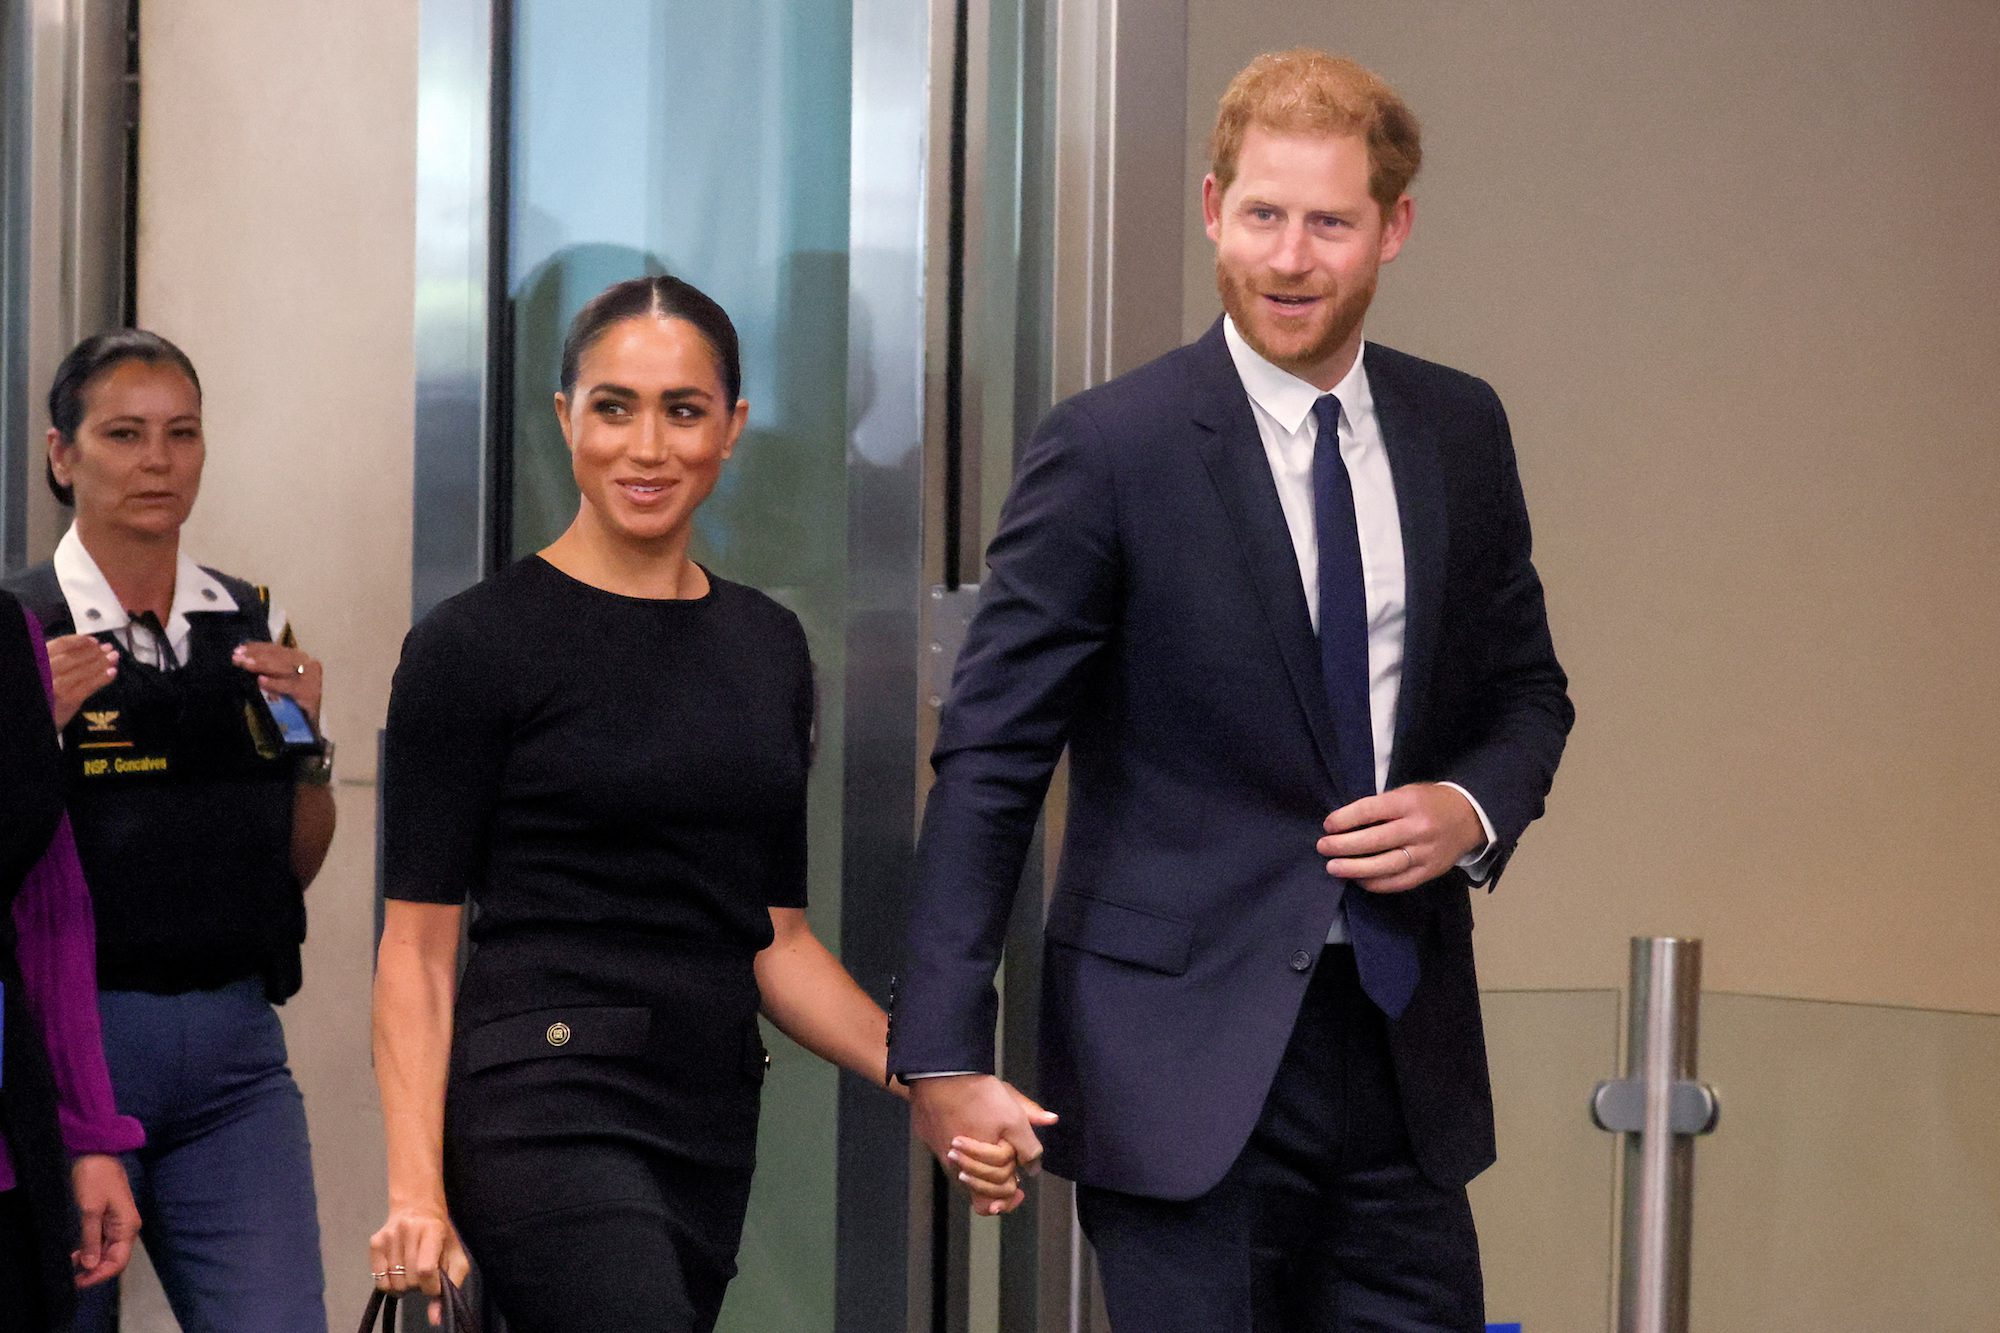 Britain's Prince Harry and his wife Meghan, Duchess of Sussex, arrive to celebrate Nelson Mandela International Day at the United Nations Headquarters in New York, U.S. July 18, 2022. REUTERS/Brendan McDermid